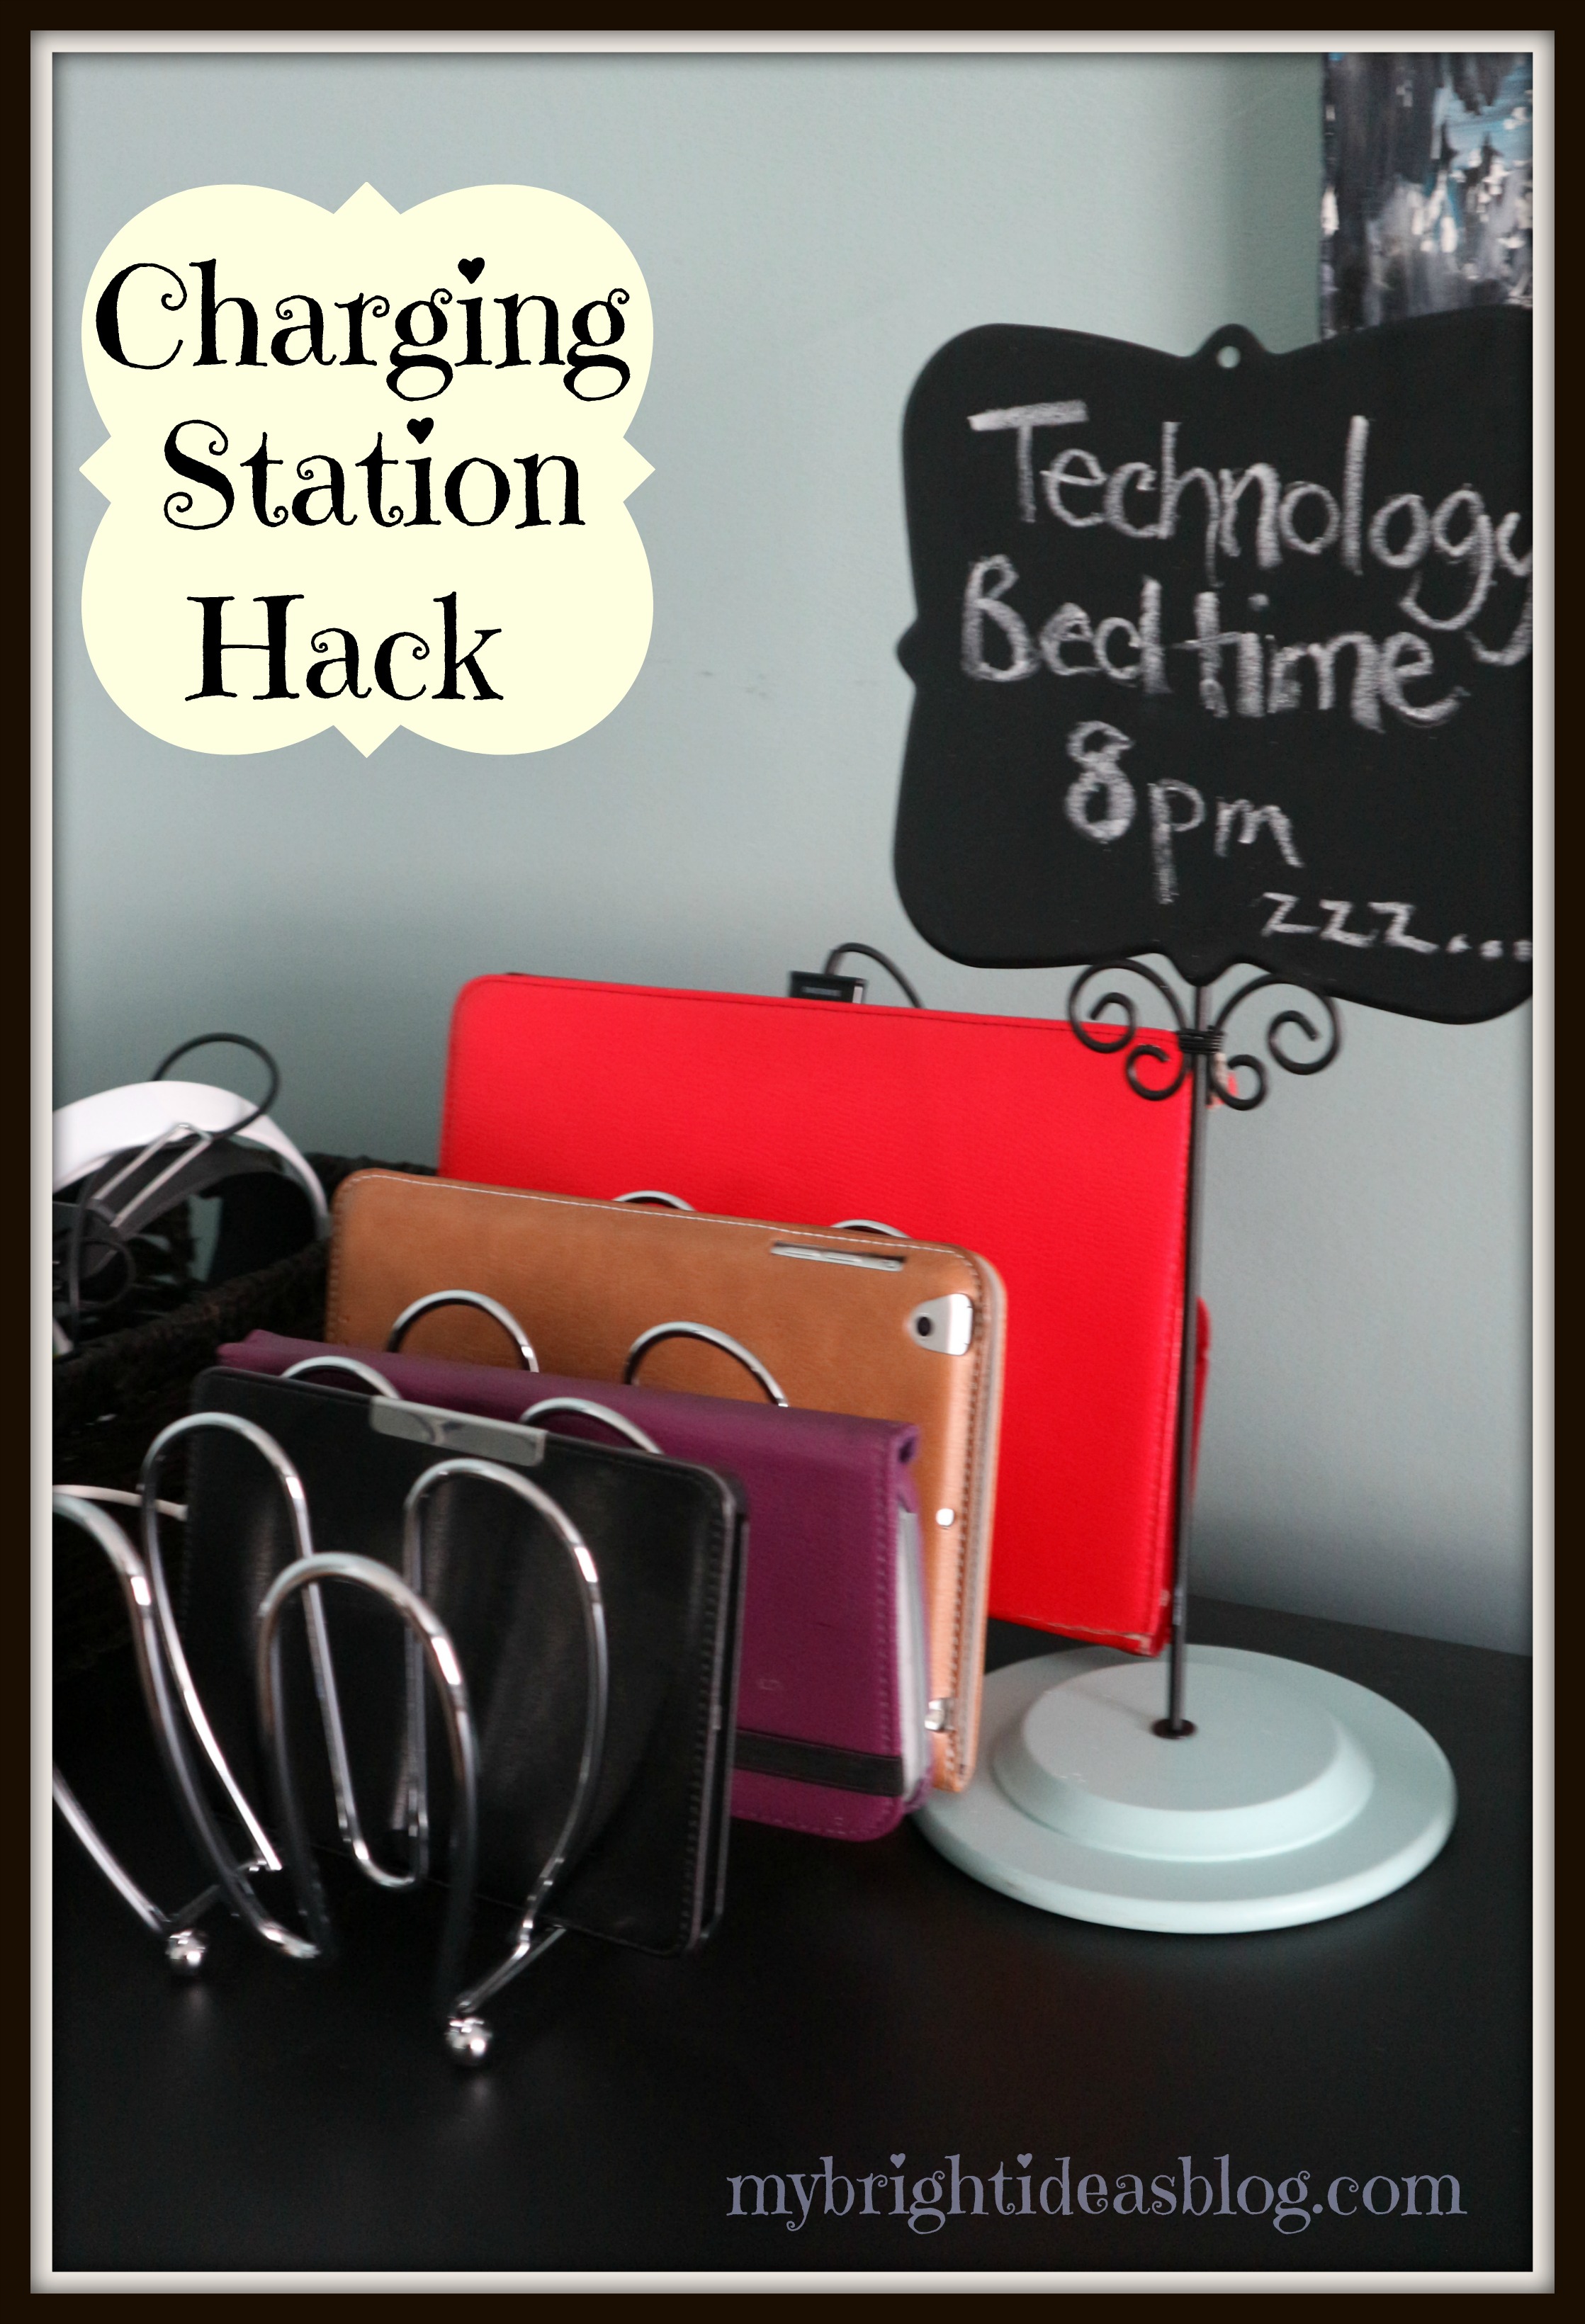 Family Charging Station-A place to put your technology when screen time is over. All the devices can be charged and ready for next use. Organize the cords around the house too! mybrightideasblog.com